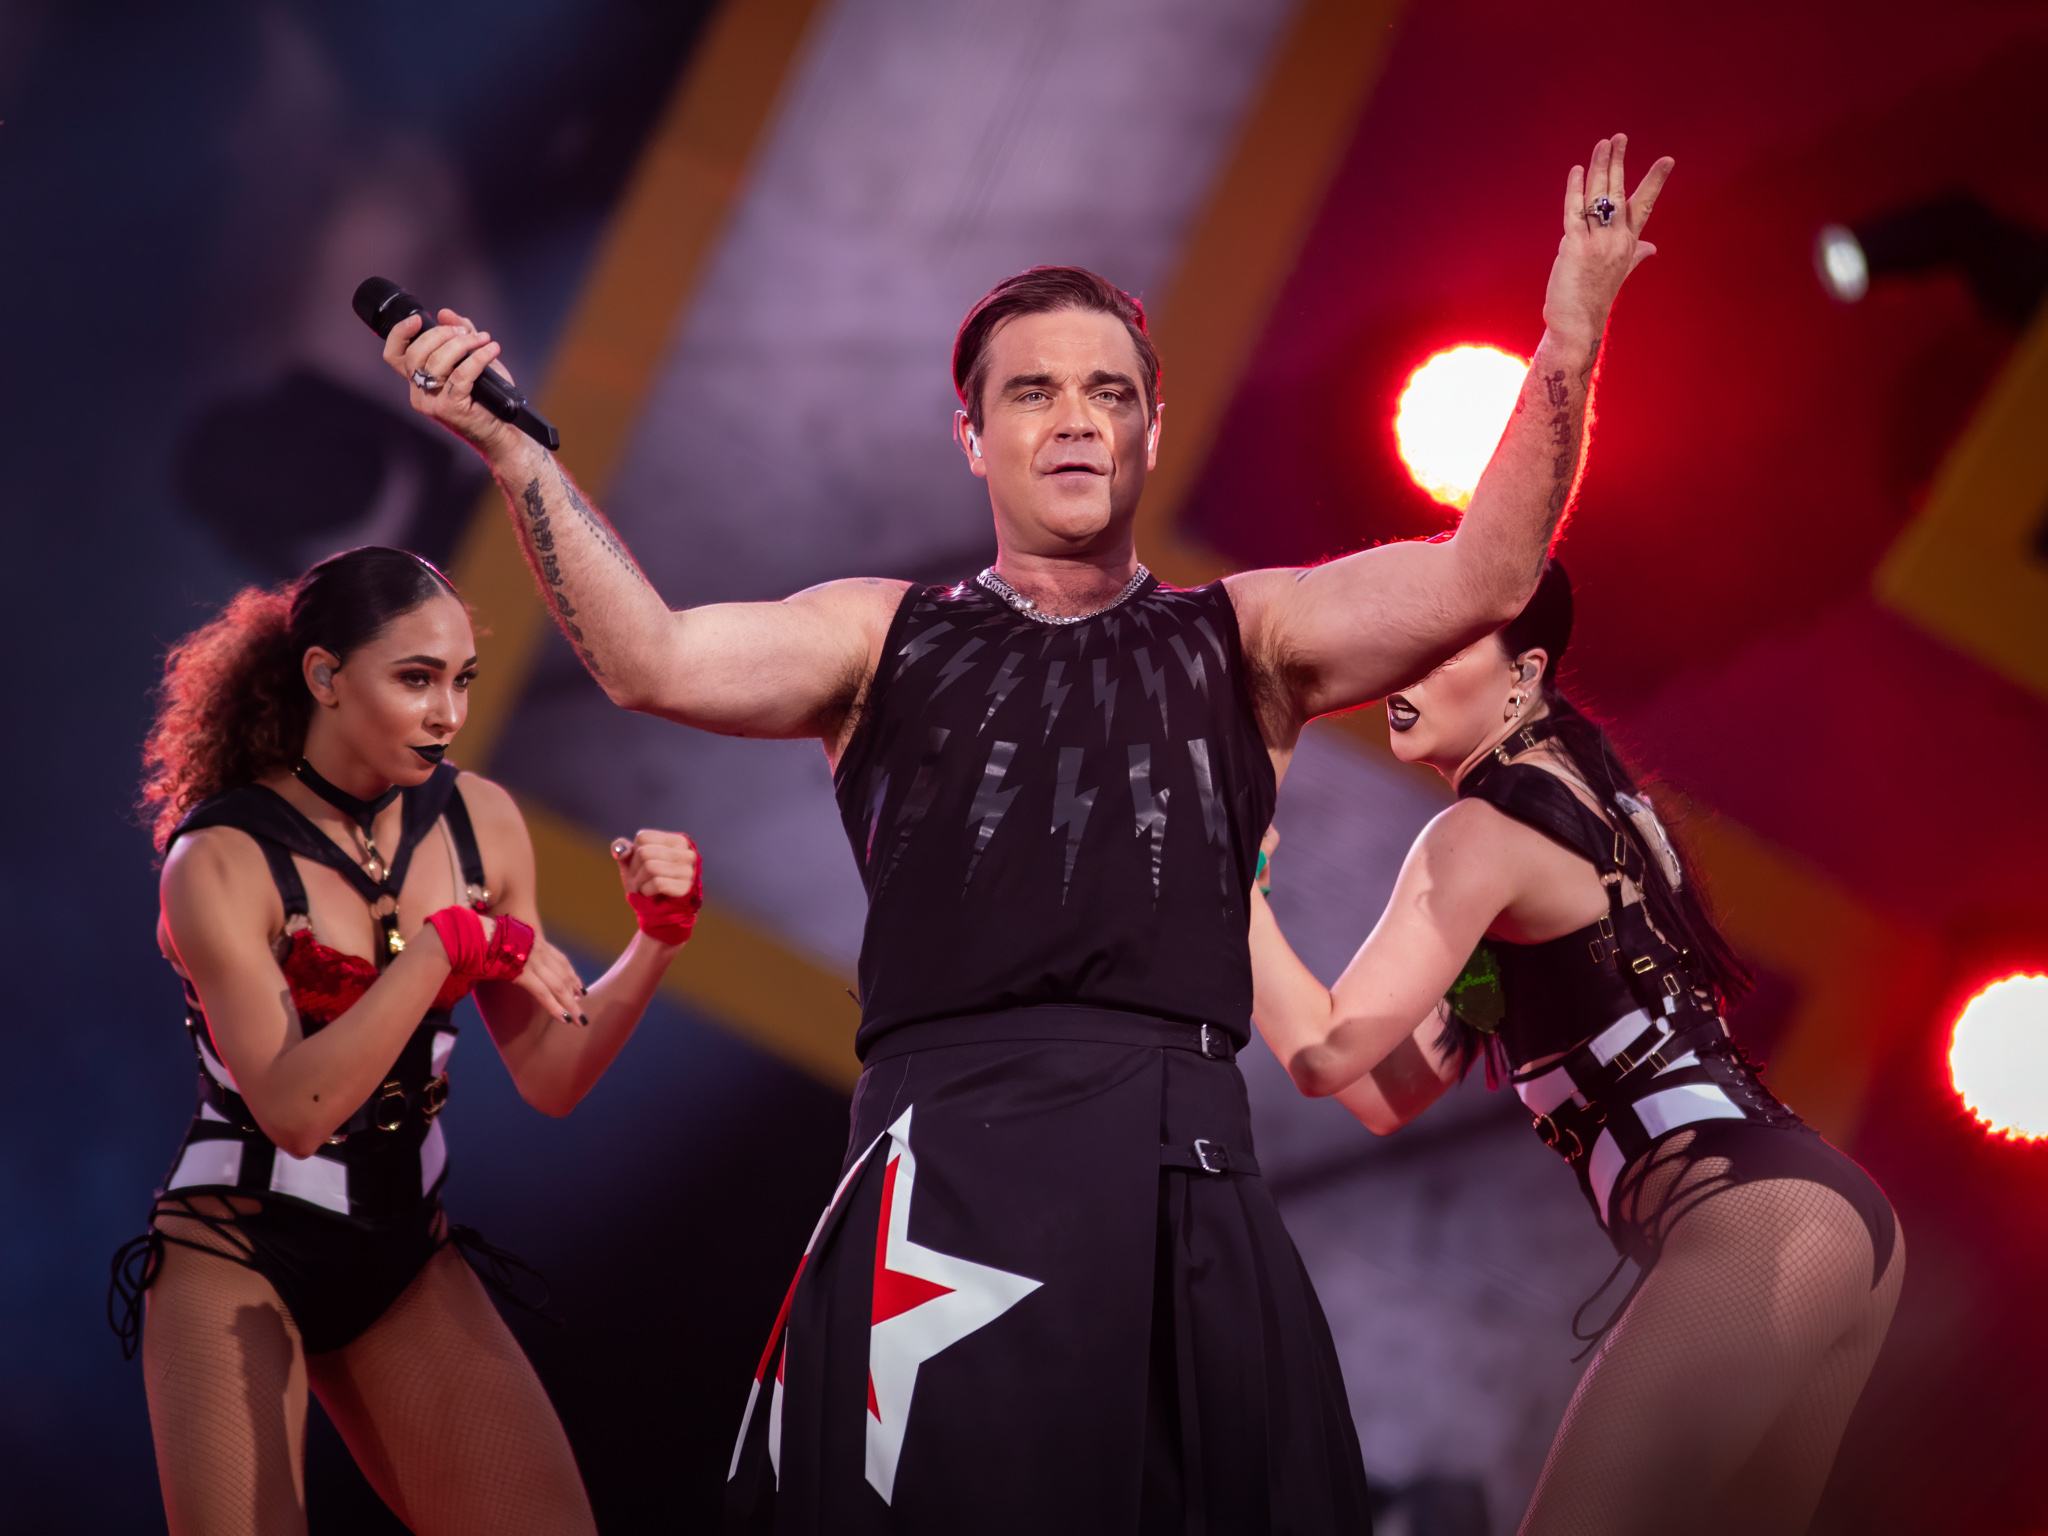 Robbie Williams by Byllet-ray Photography